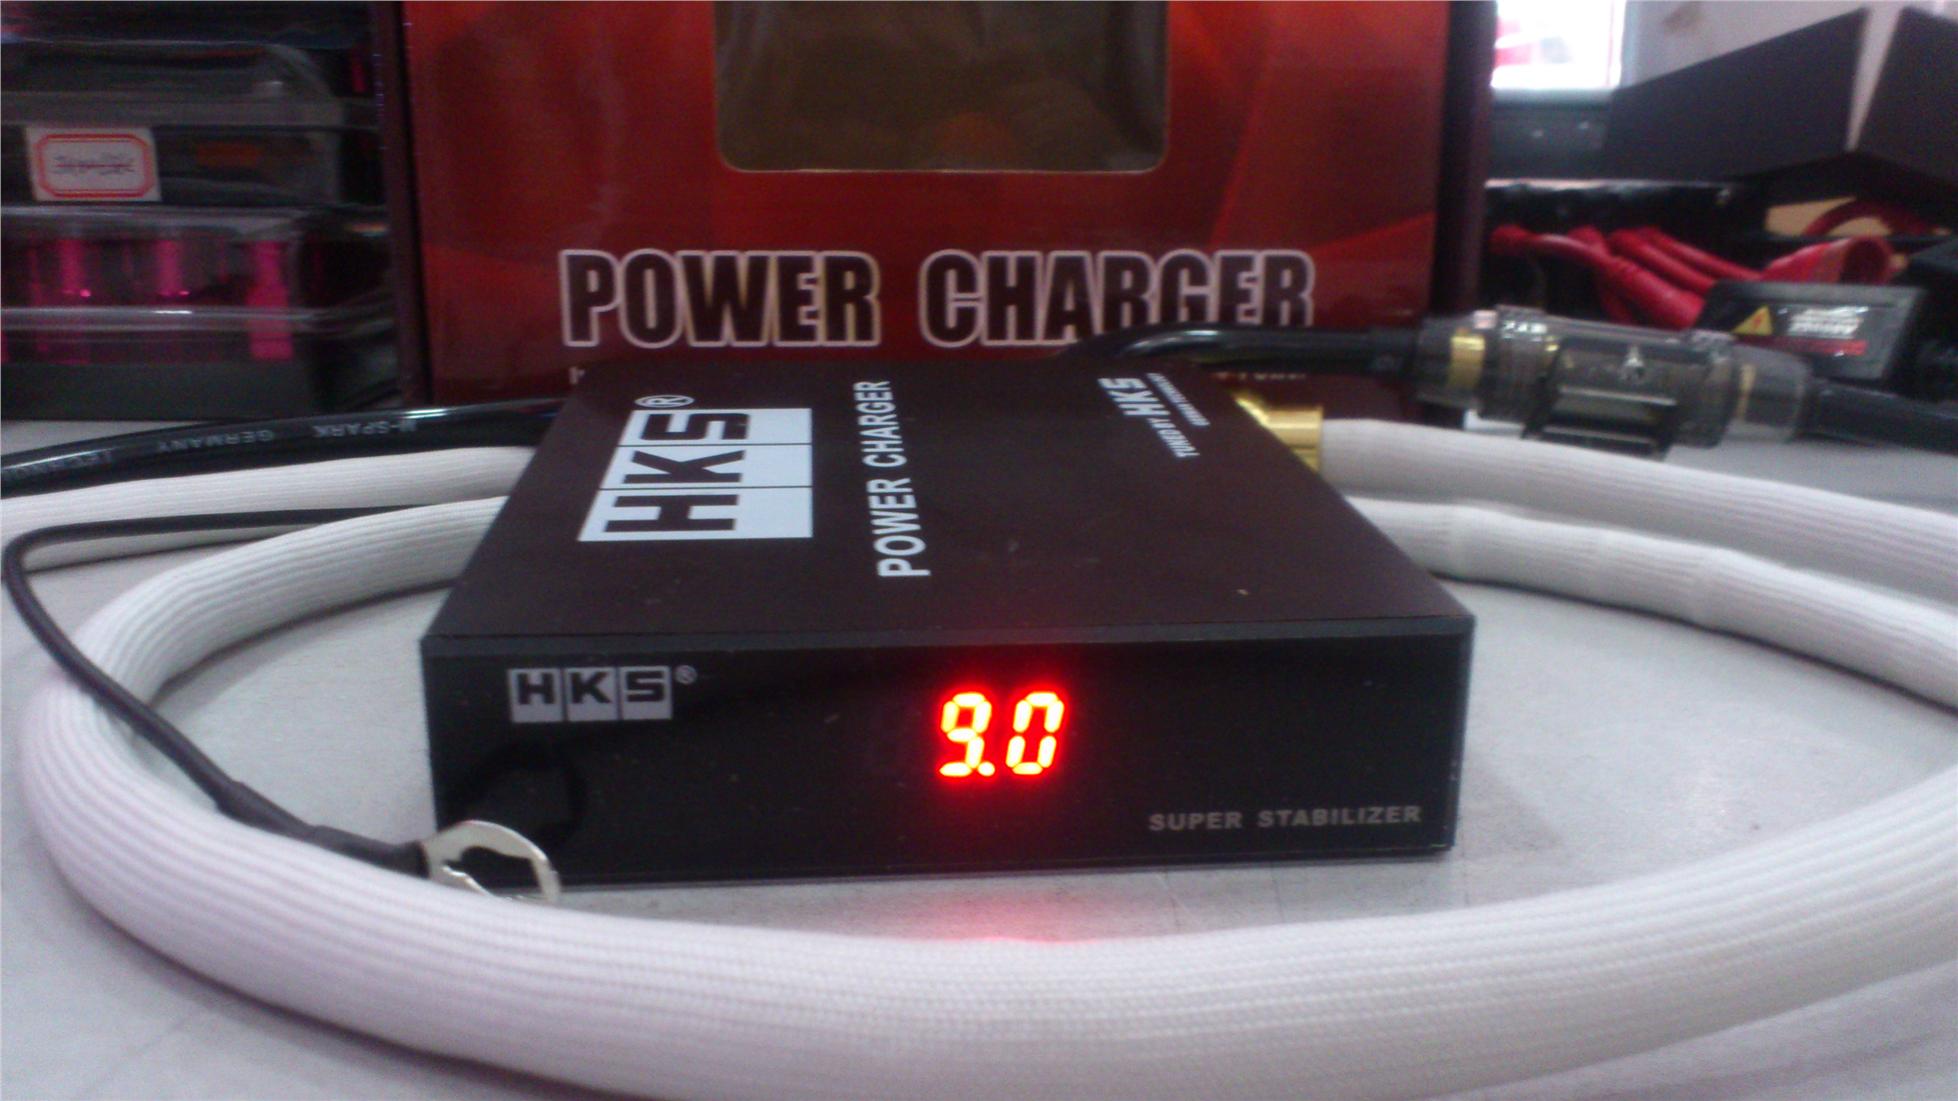 HKS Power Charger Pivot Voltage Stabilizer with Meter Fuel Saving